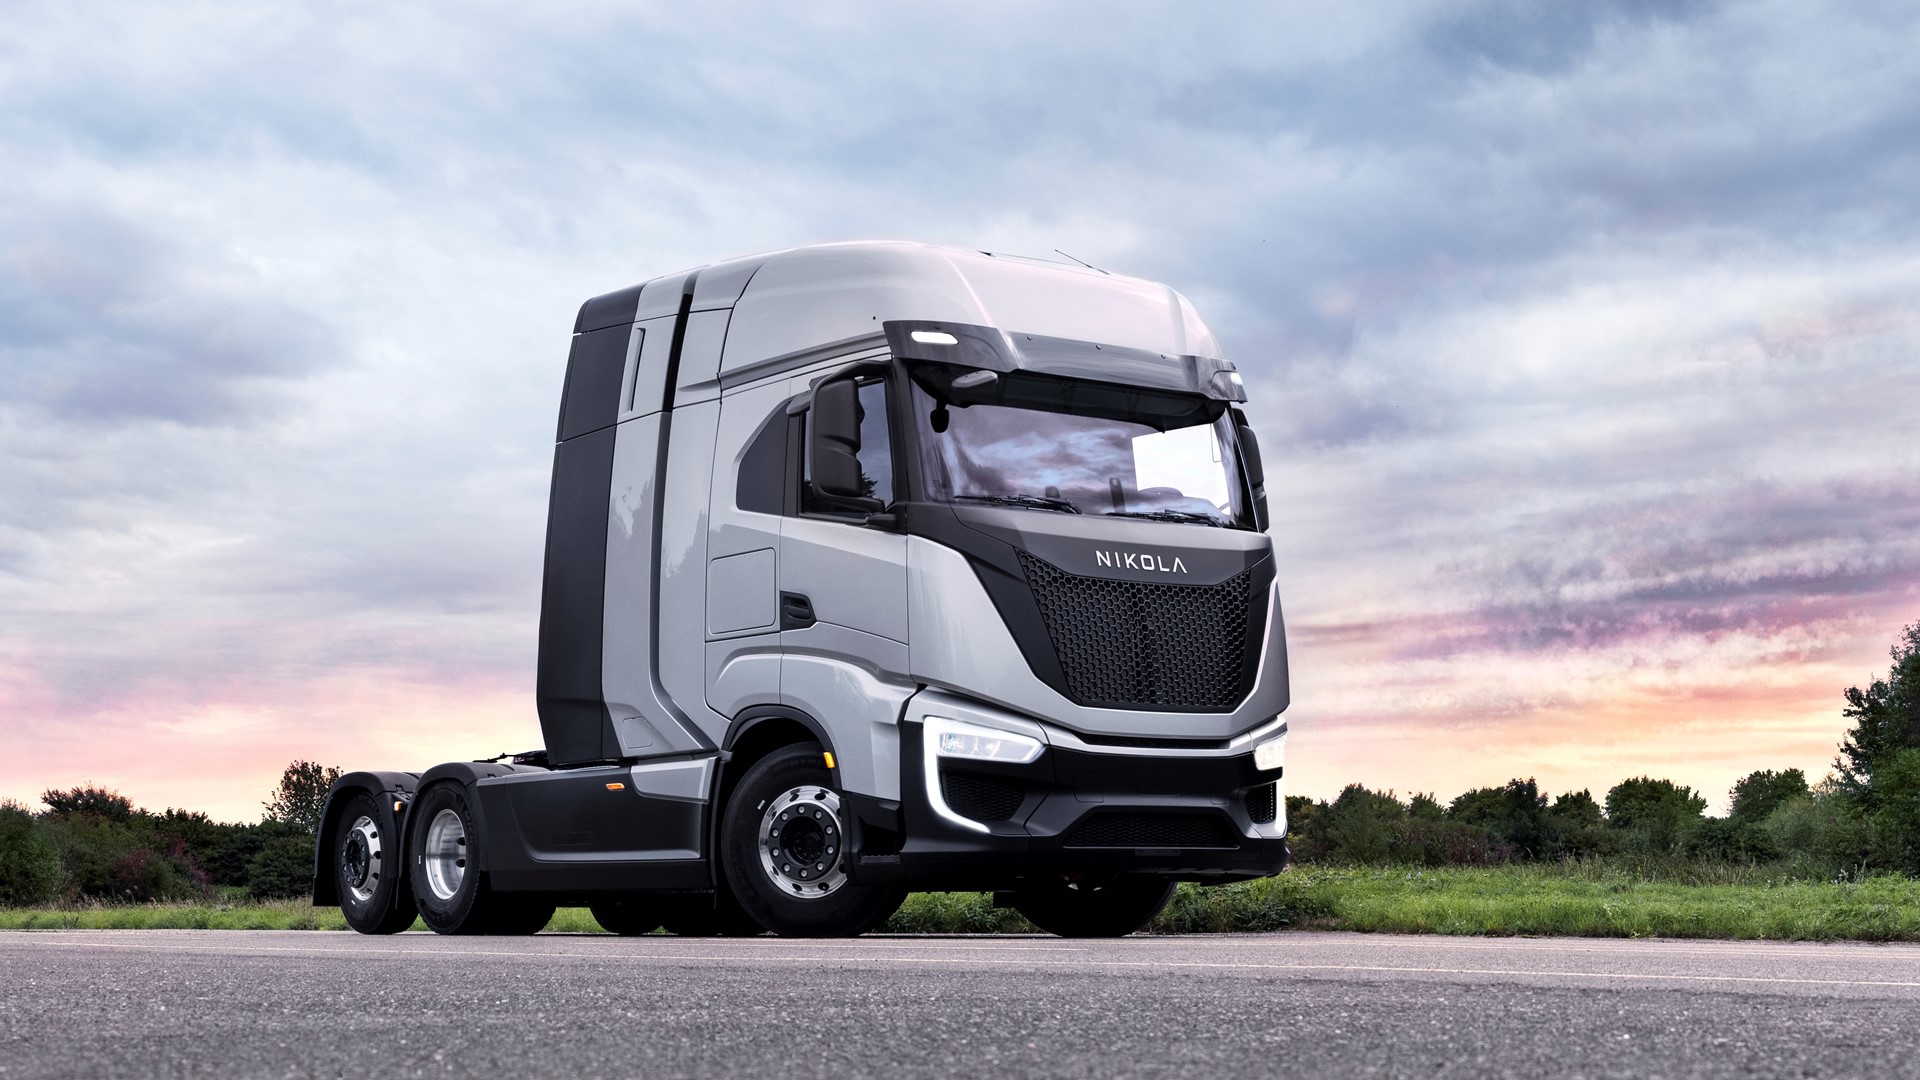 Iveco Group and Nikola Corporation’s sustainable transport journey progresses today at IAA Transportation 2022